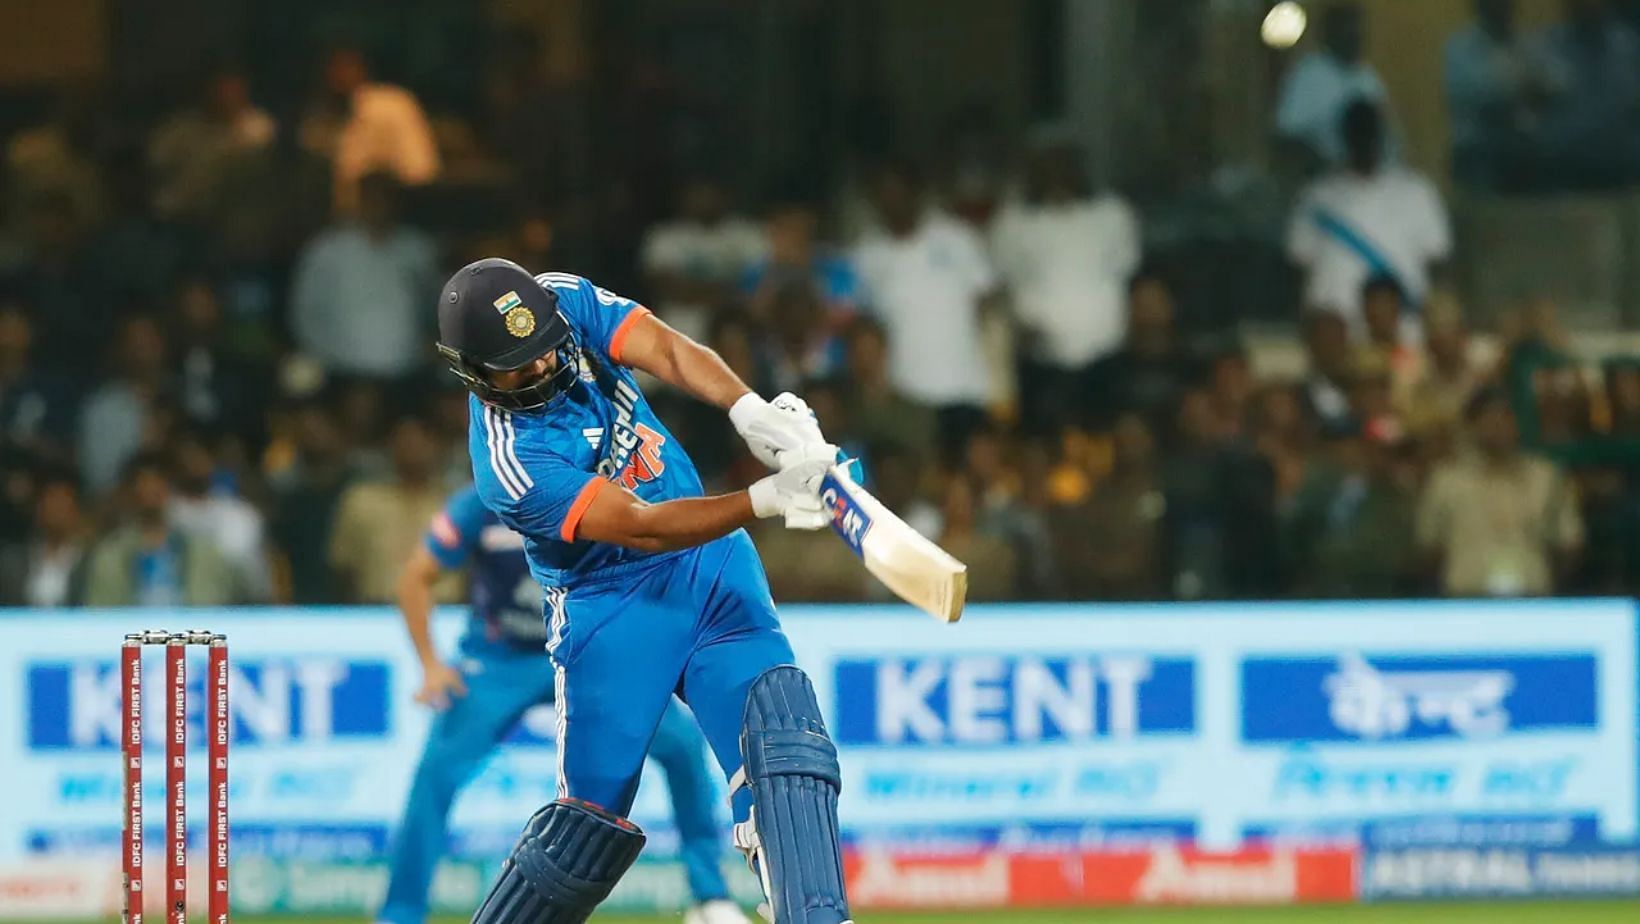 Rohit Sharma added two handy cameos of 13 and 11 in the Super Overs